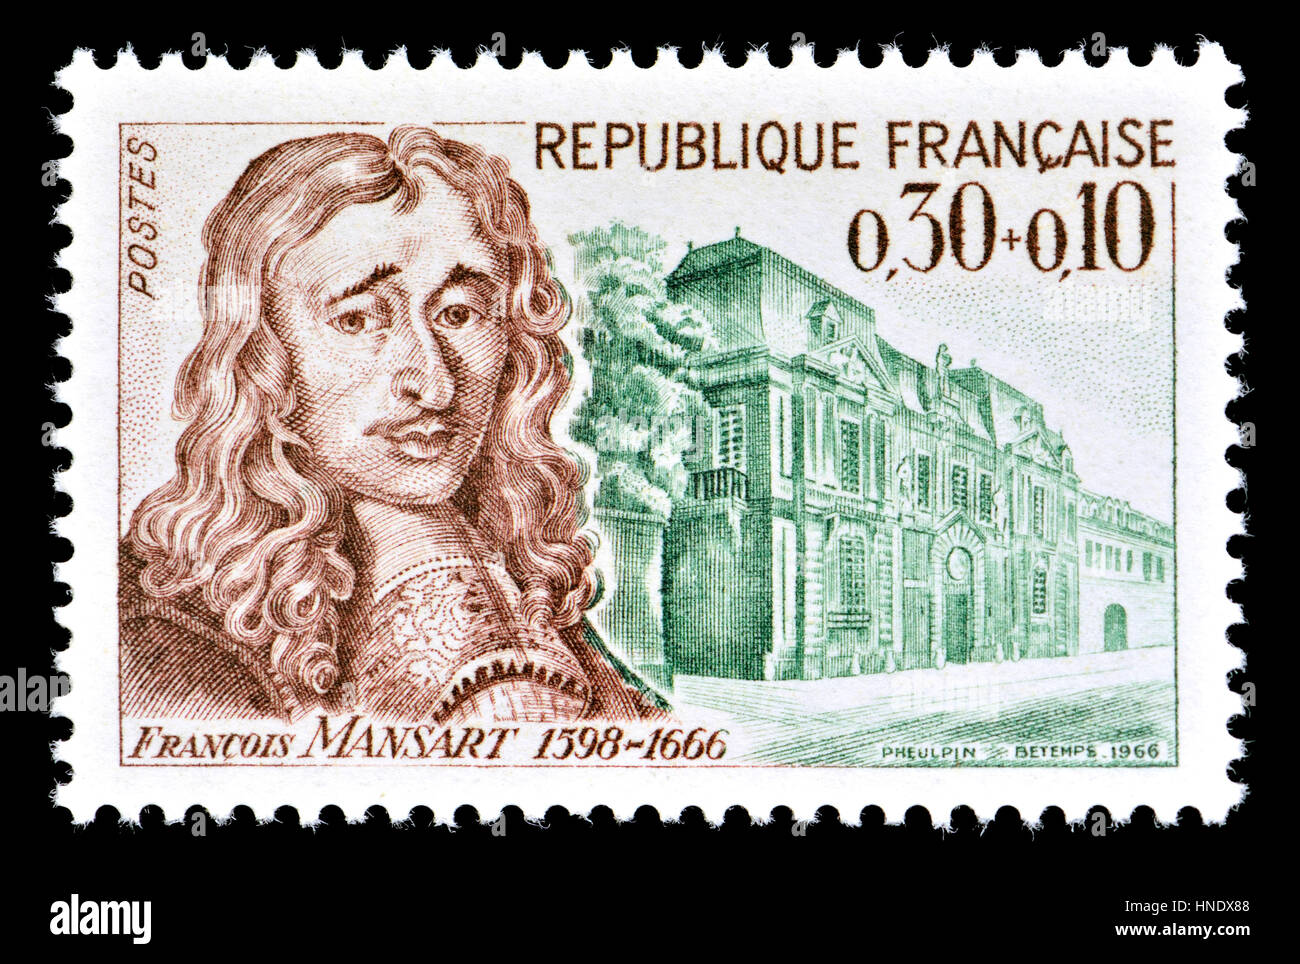 French postage stamp (1966): François Mansart (1598 – 1666) French architect credited with introducing classicism into Baroque architecture of France. Stock Photo